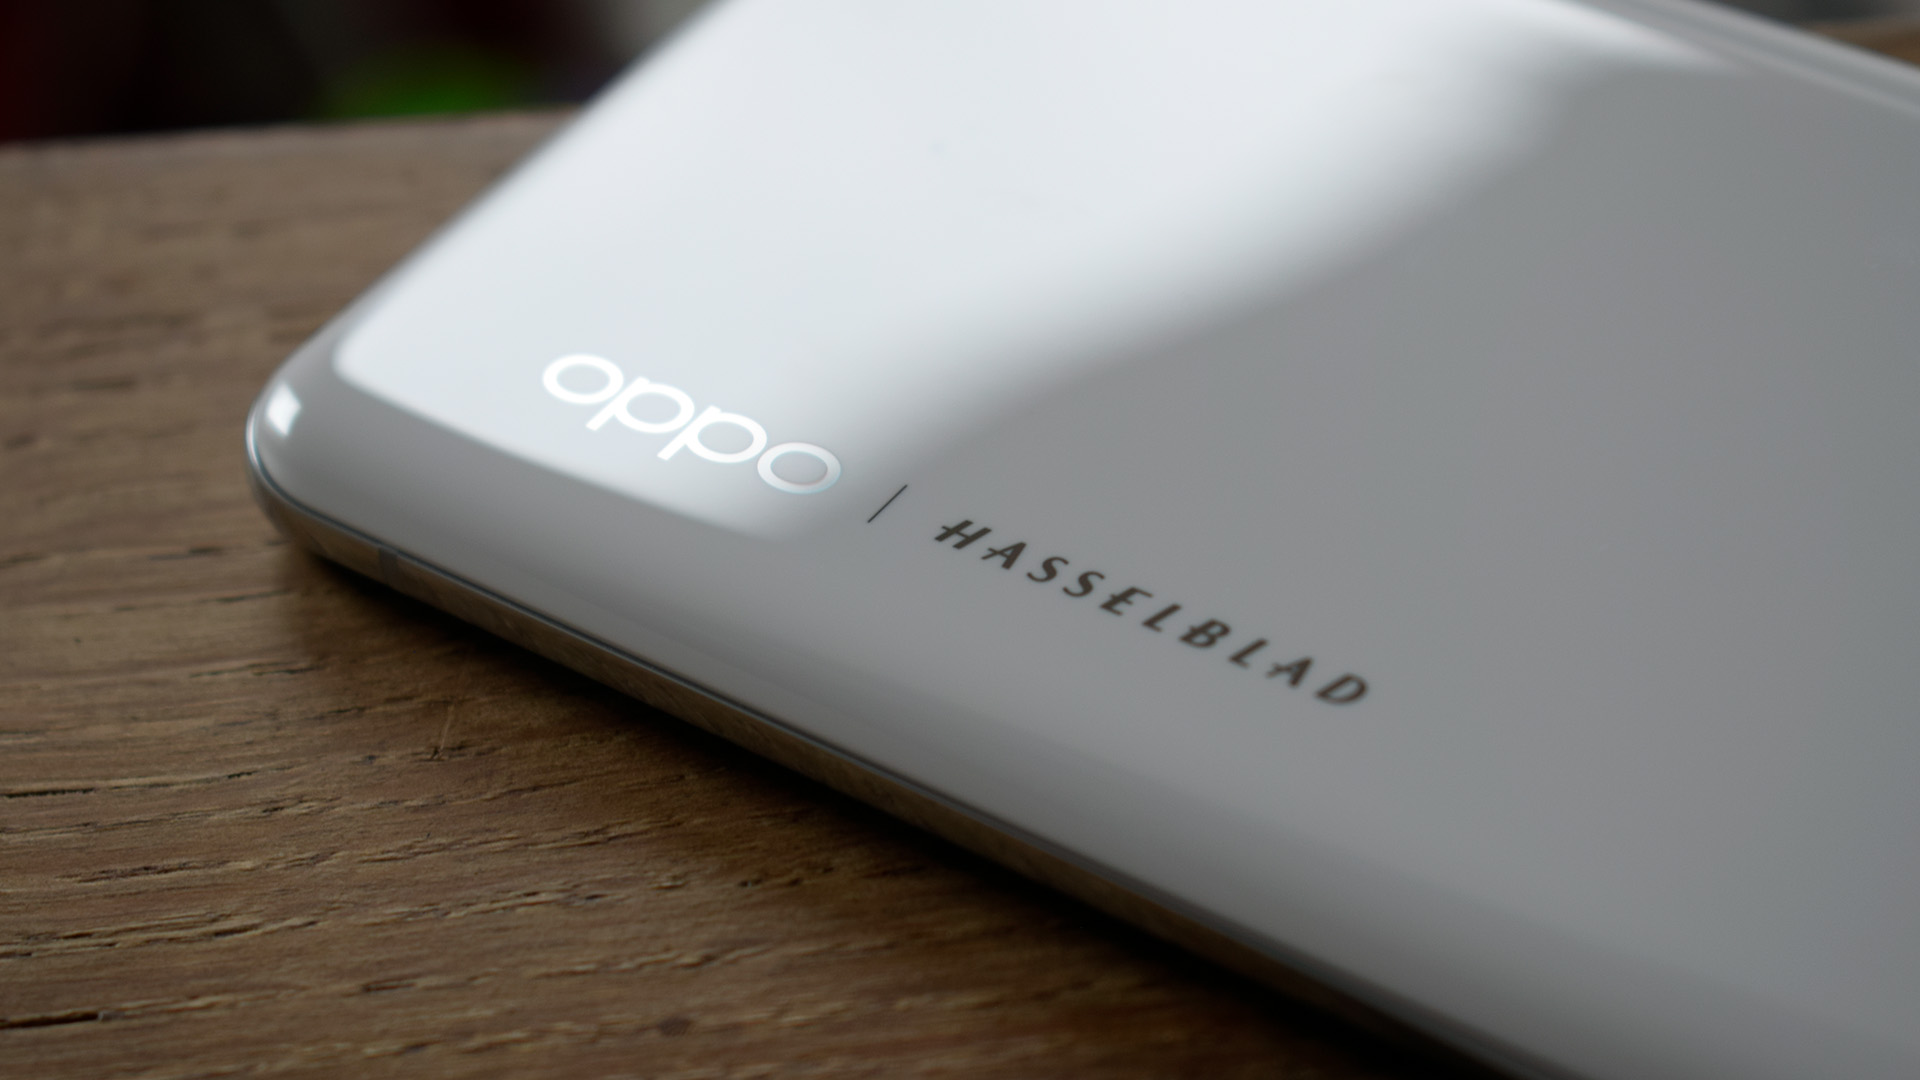 Oppo Hasselblad logo is close